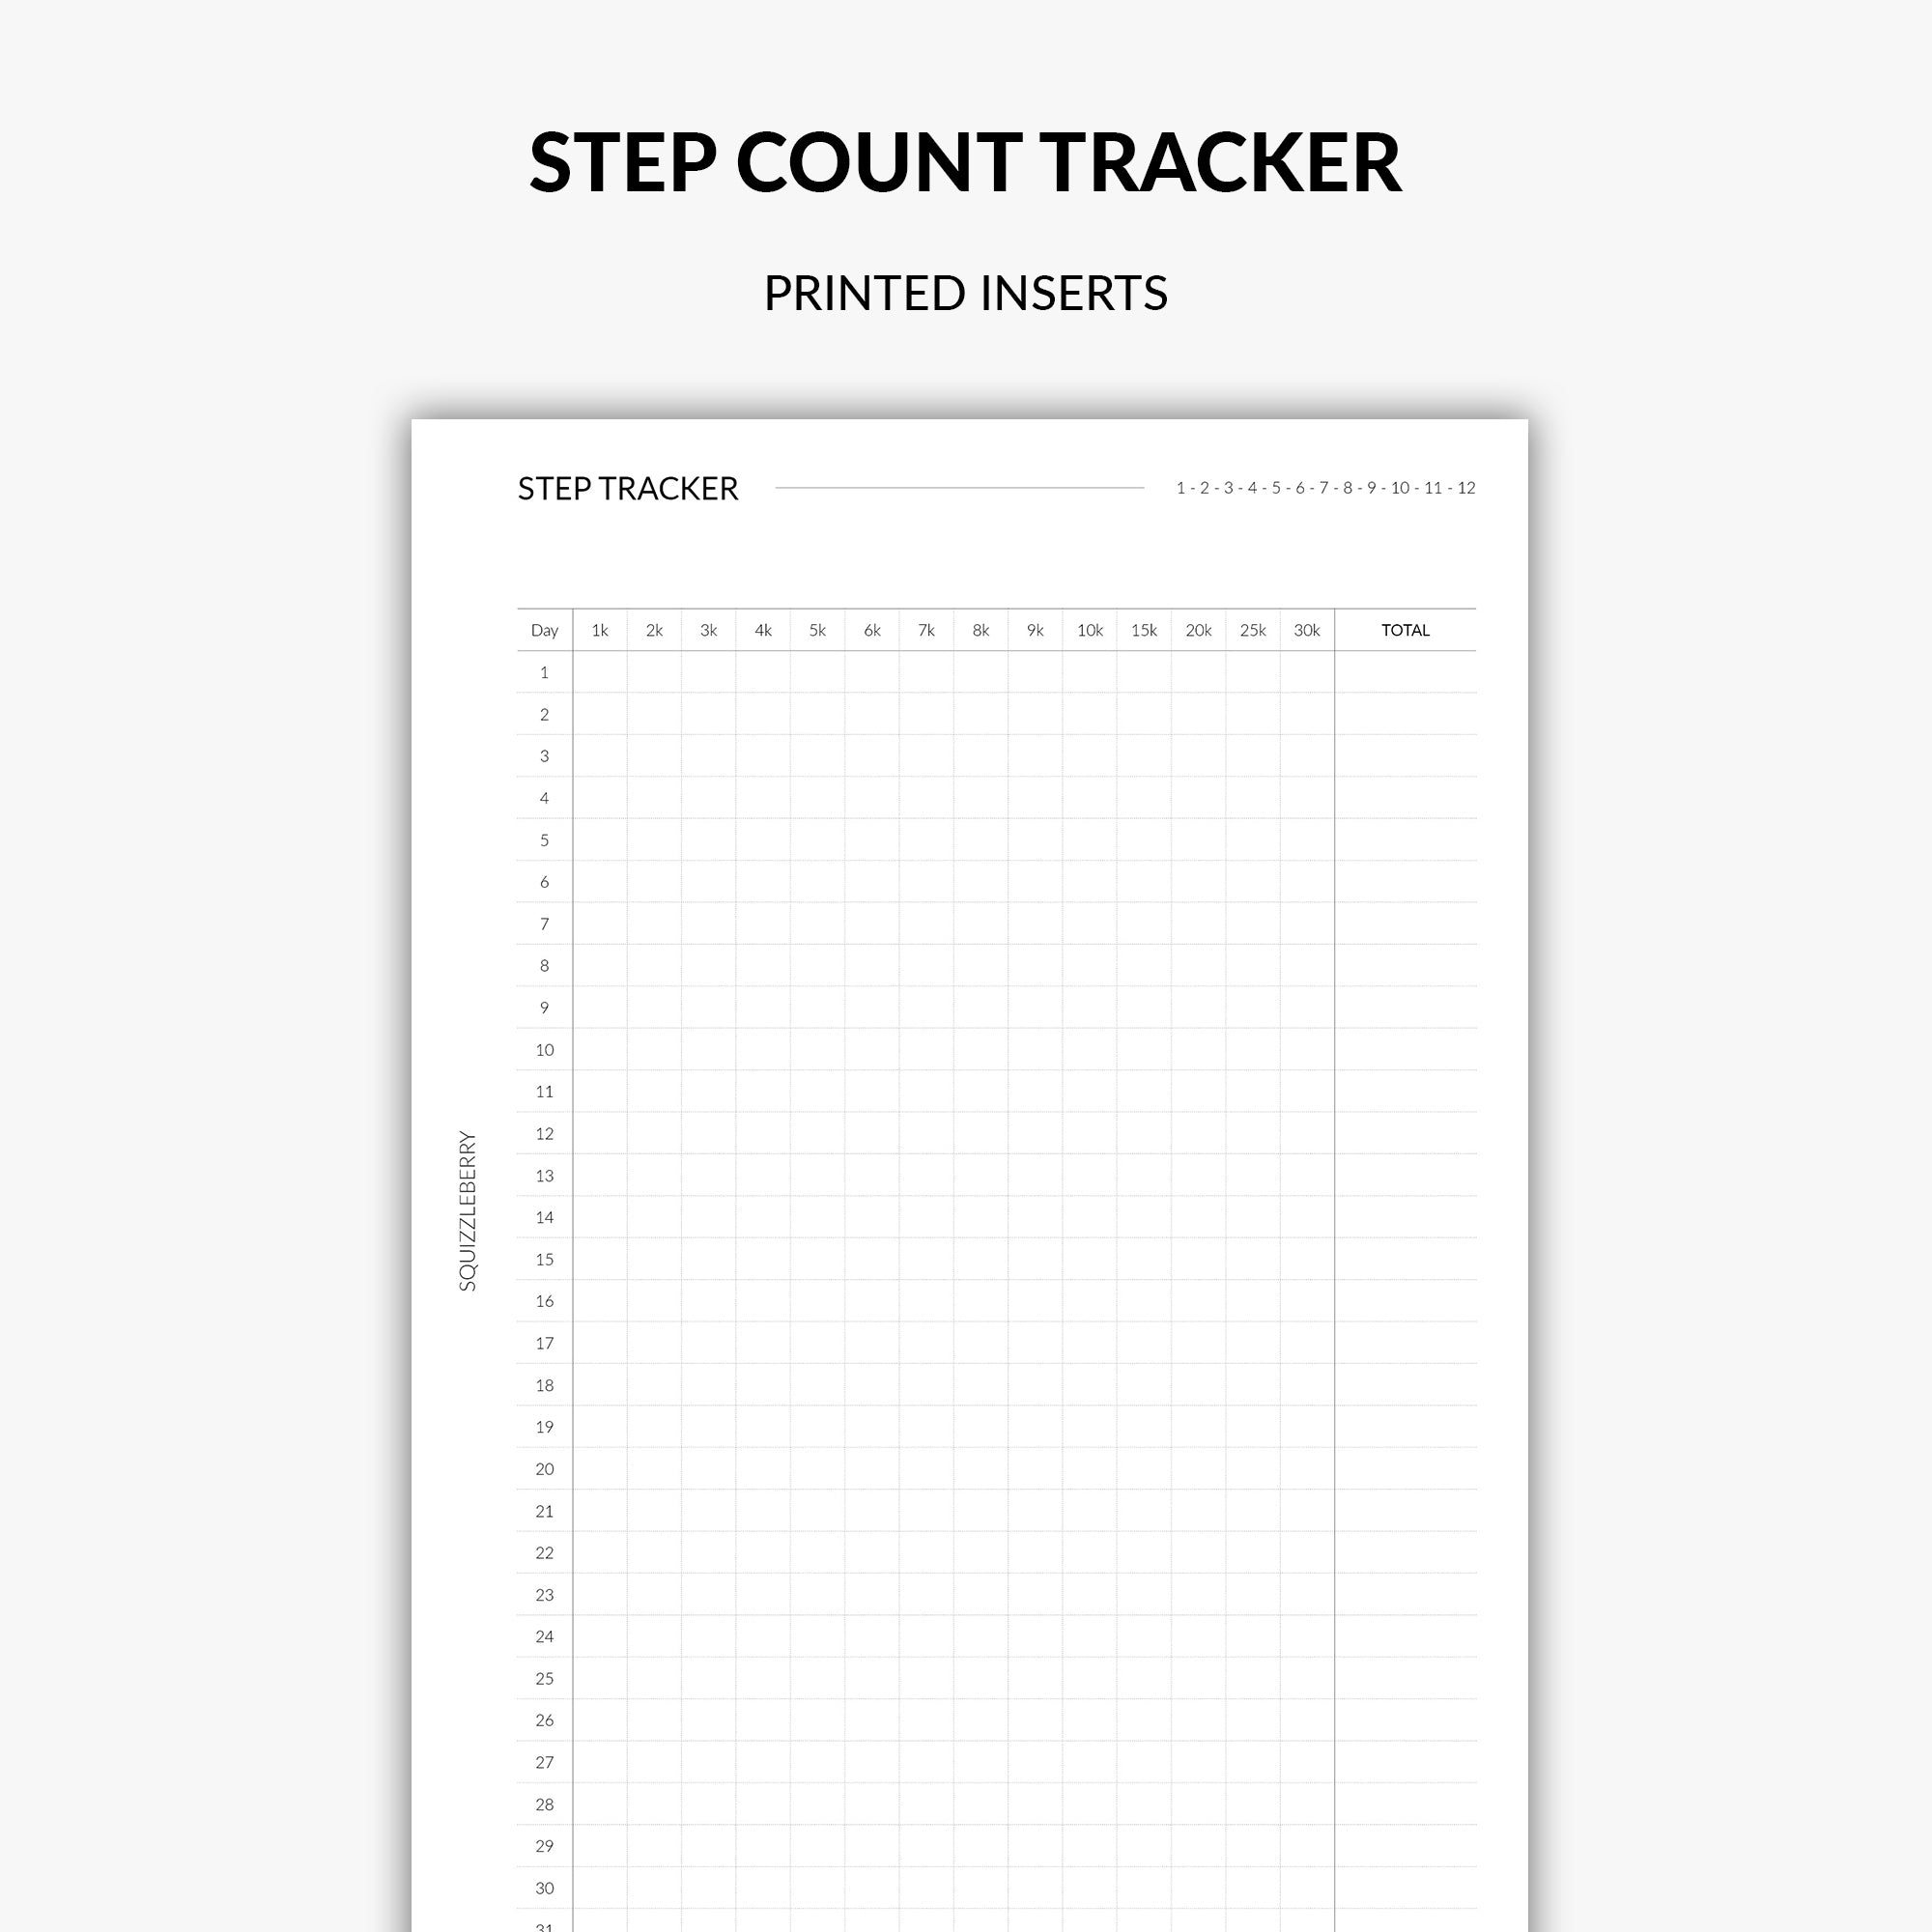 Step Count Tracker